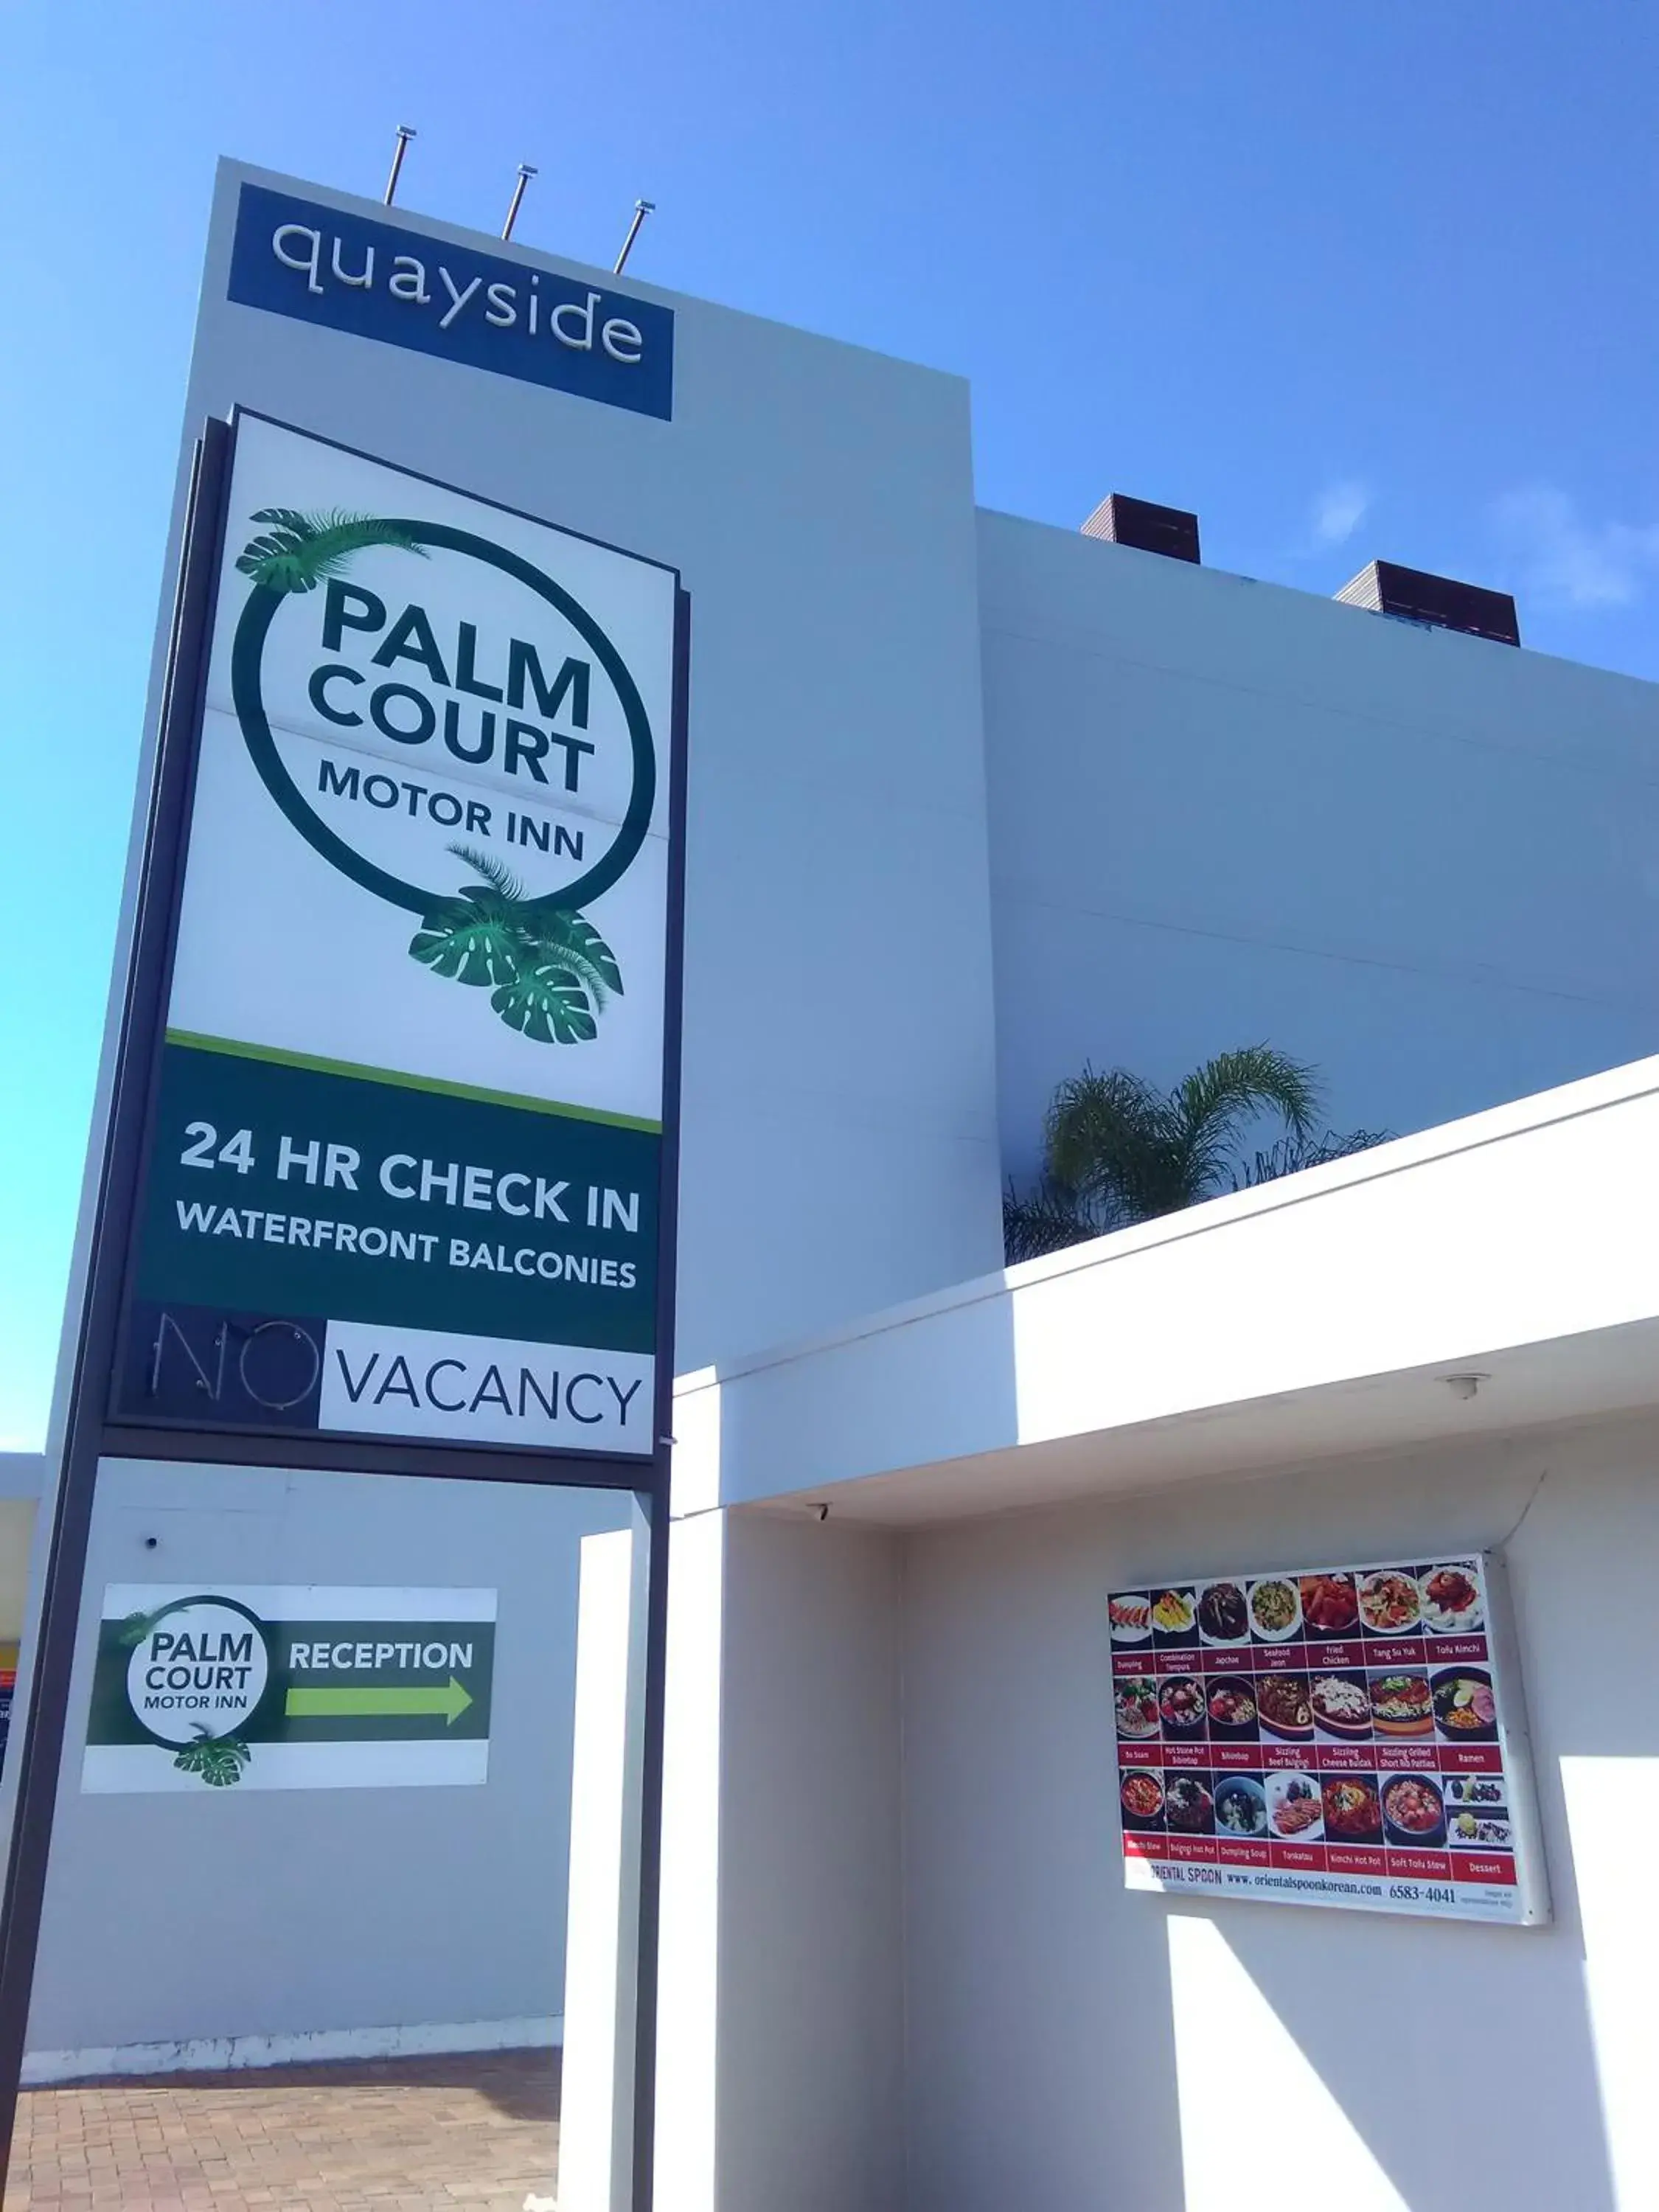 Property building in Palm Court Motor Inn